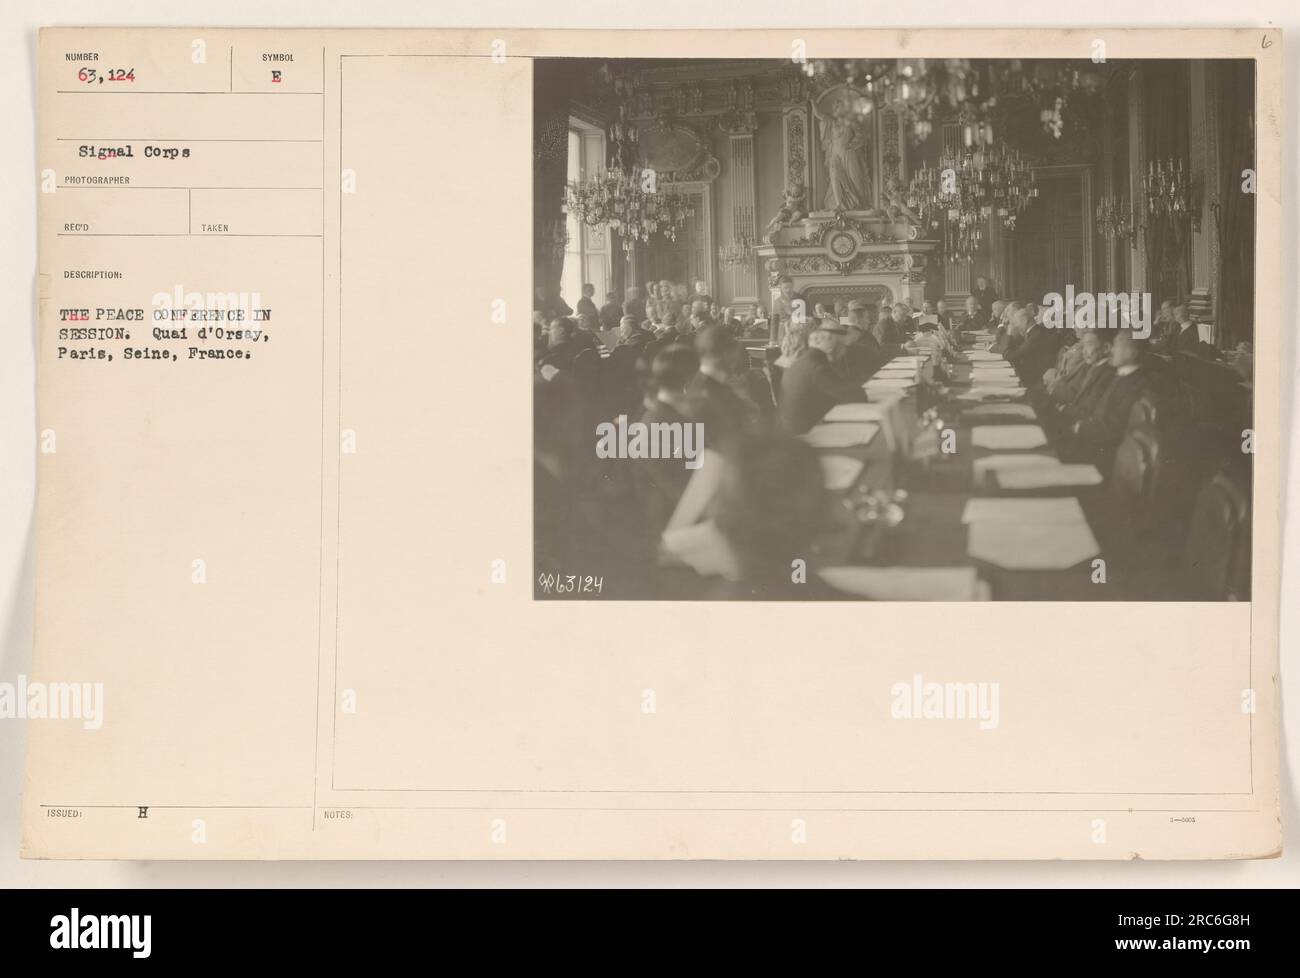 Delegates from various countries at the Peace Conference in session at the Quai d'Orsay in Paris, France. This photograph, taken by a signal corps photographer, captures the diplomatic discussions aimed at negotiating and establishing peace after World War One. Image NU 63, 124. Notes indicate the unique identifier and additional details. Stock Photo